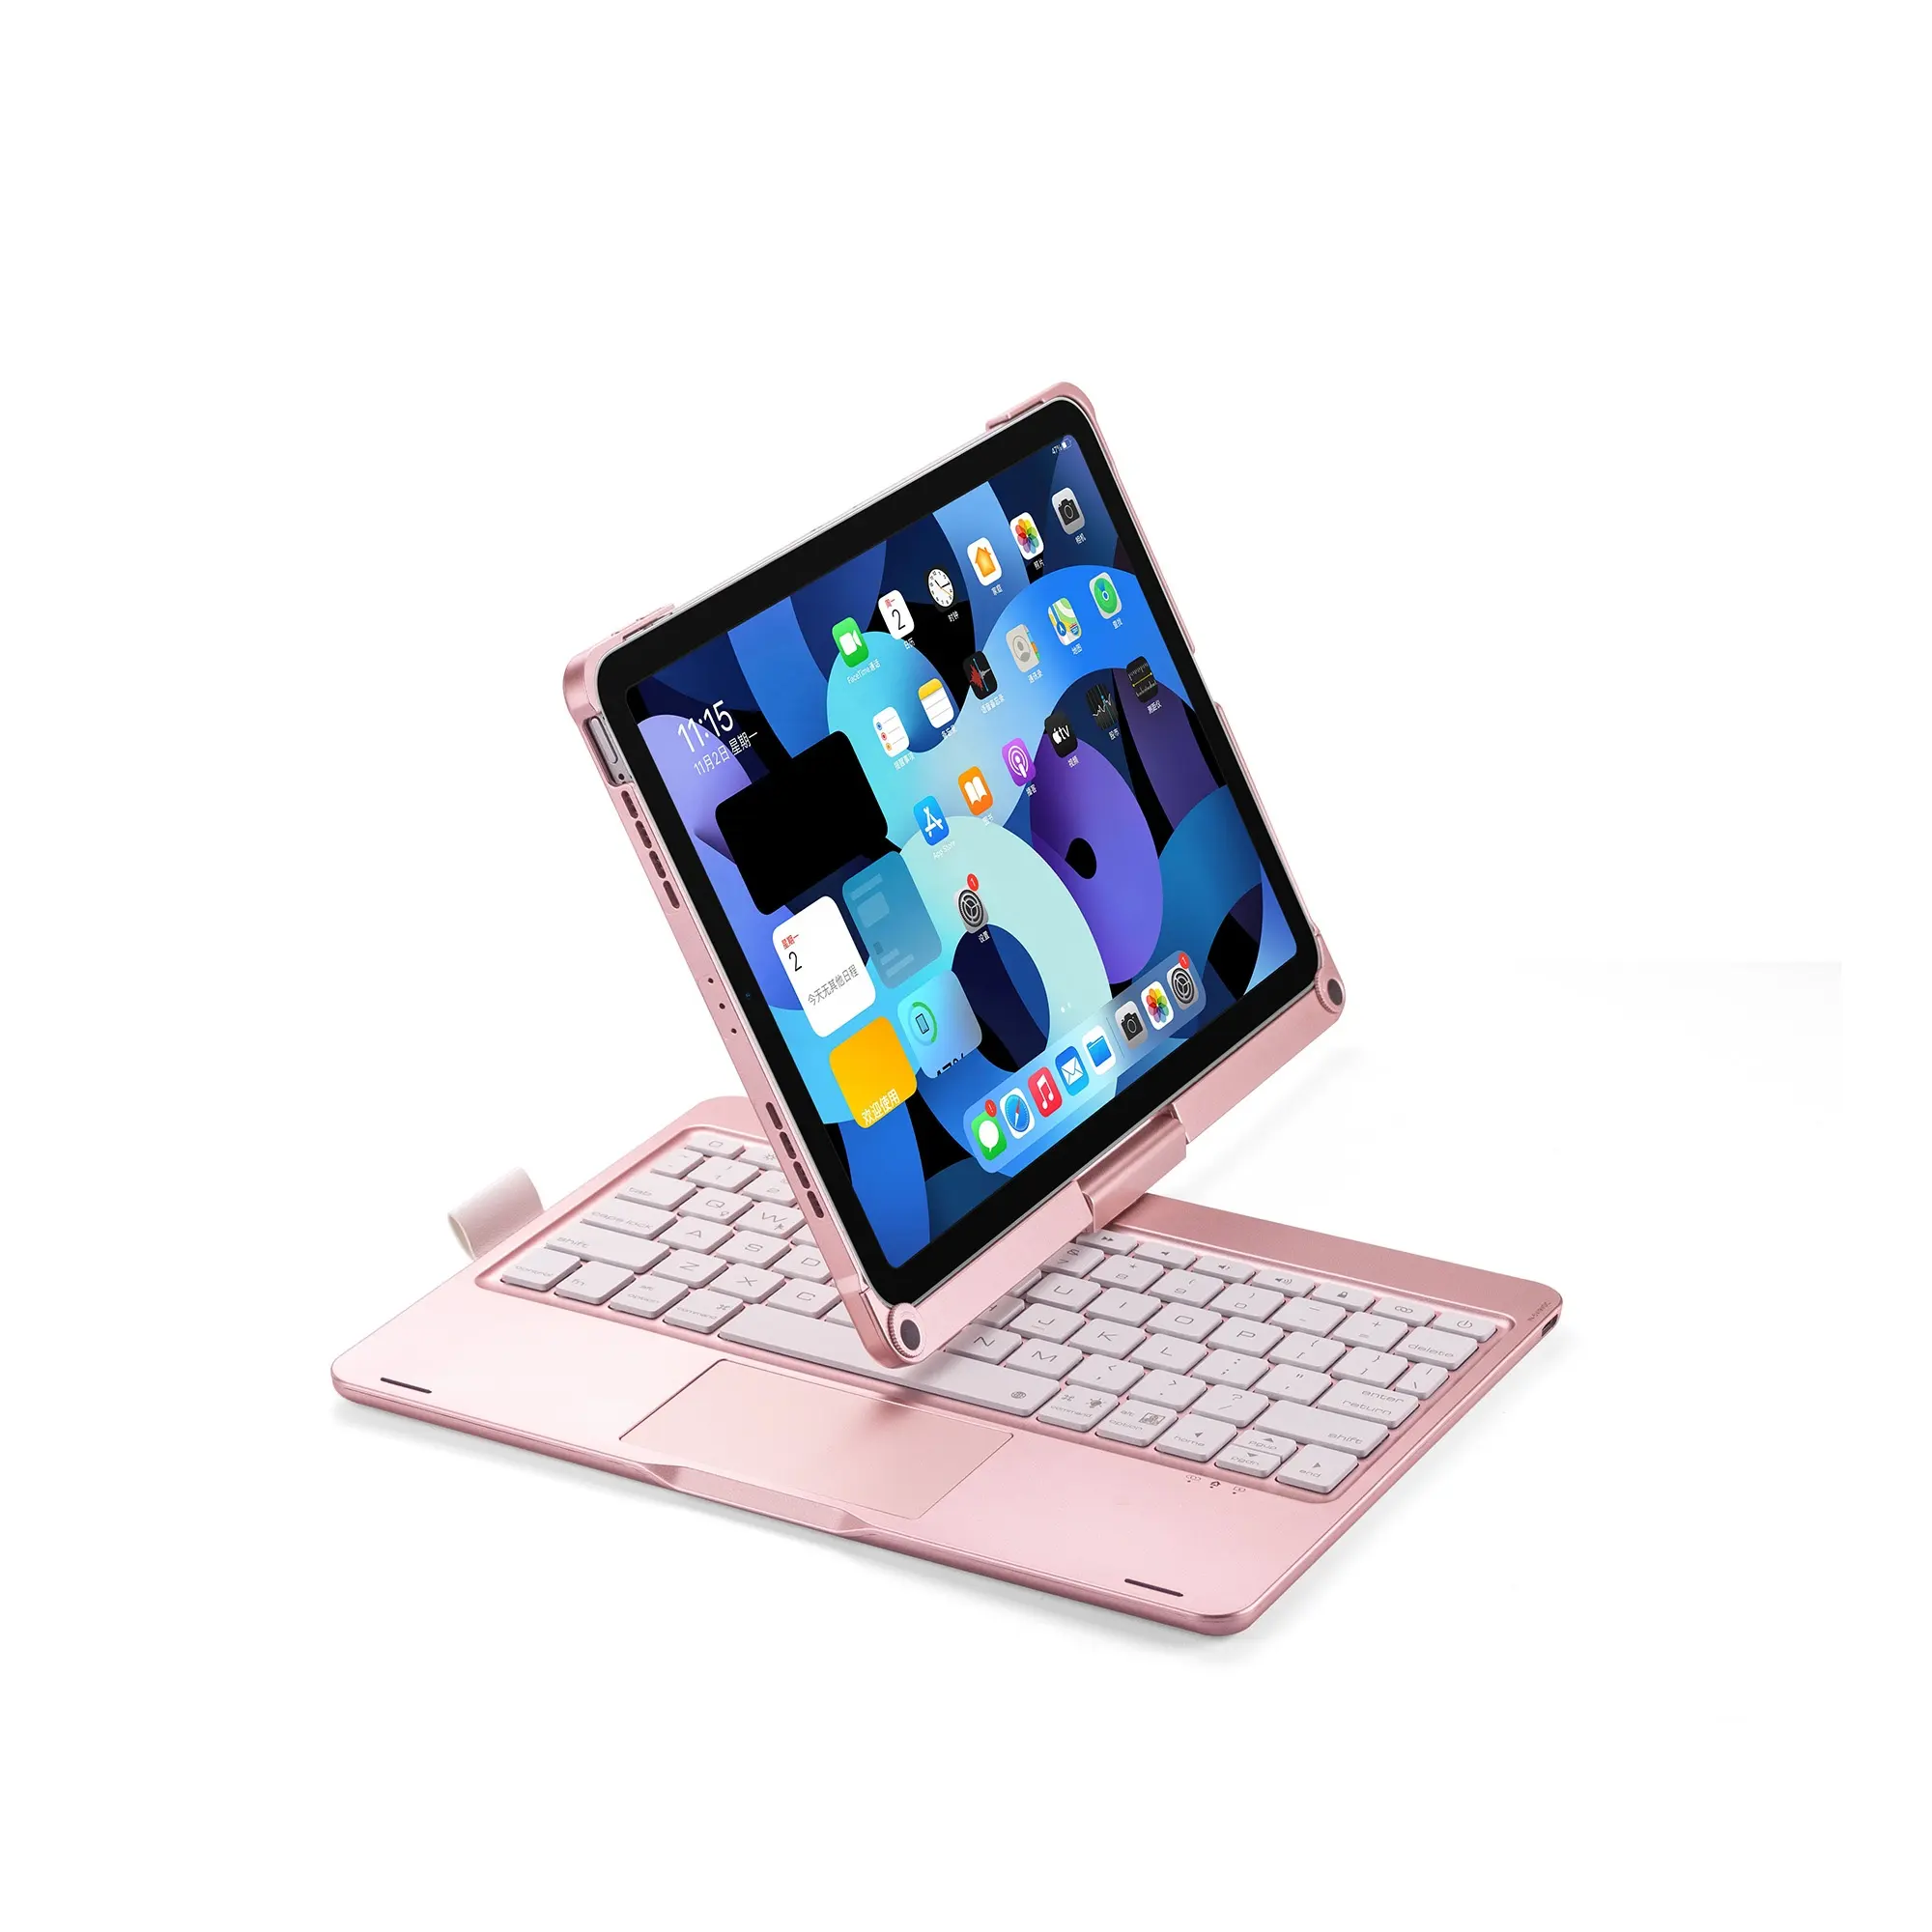 360 Degree Rotation Touchpad Keyboard Wireless Keyboard for iPad Tablet with Keyboard 109 11 inch